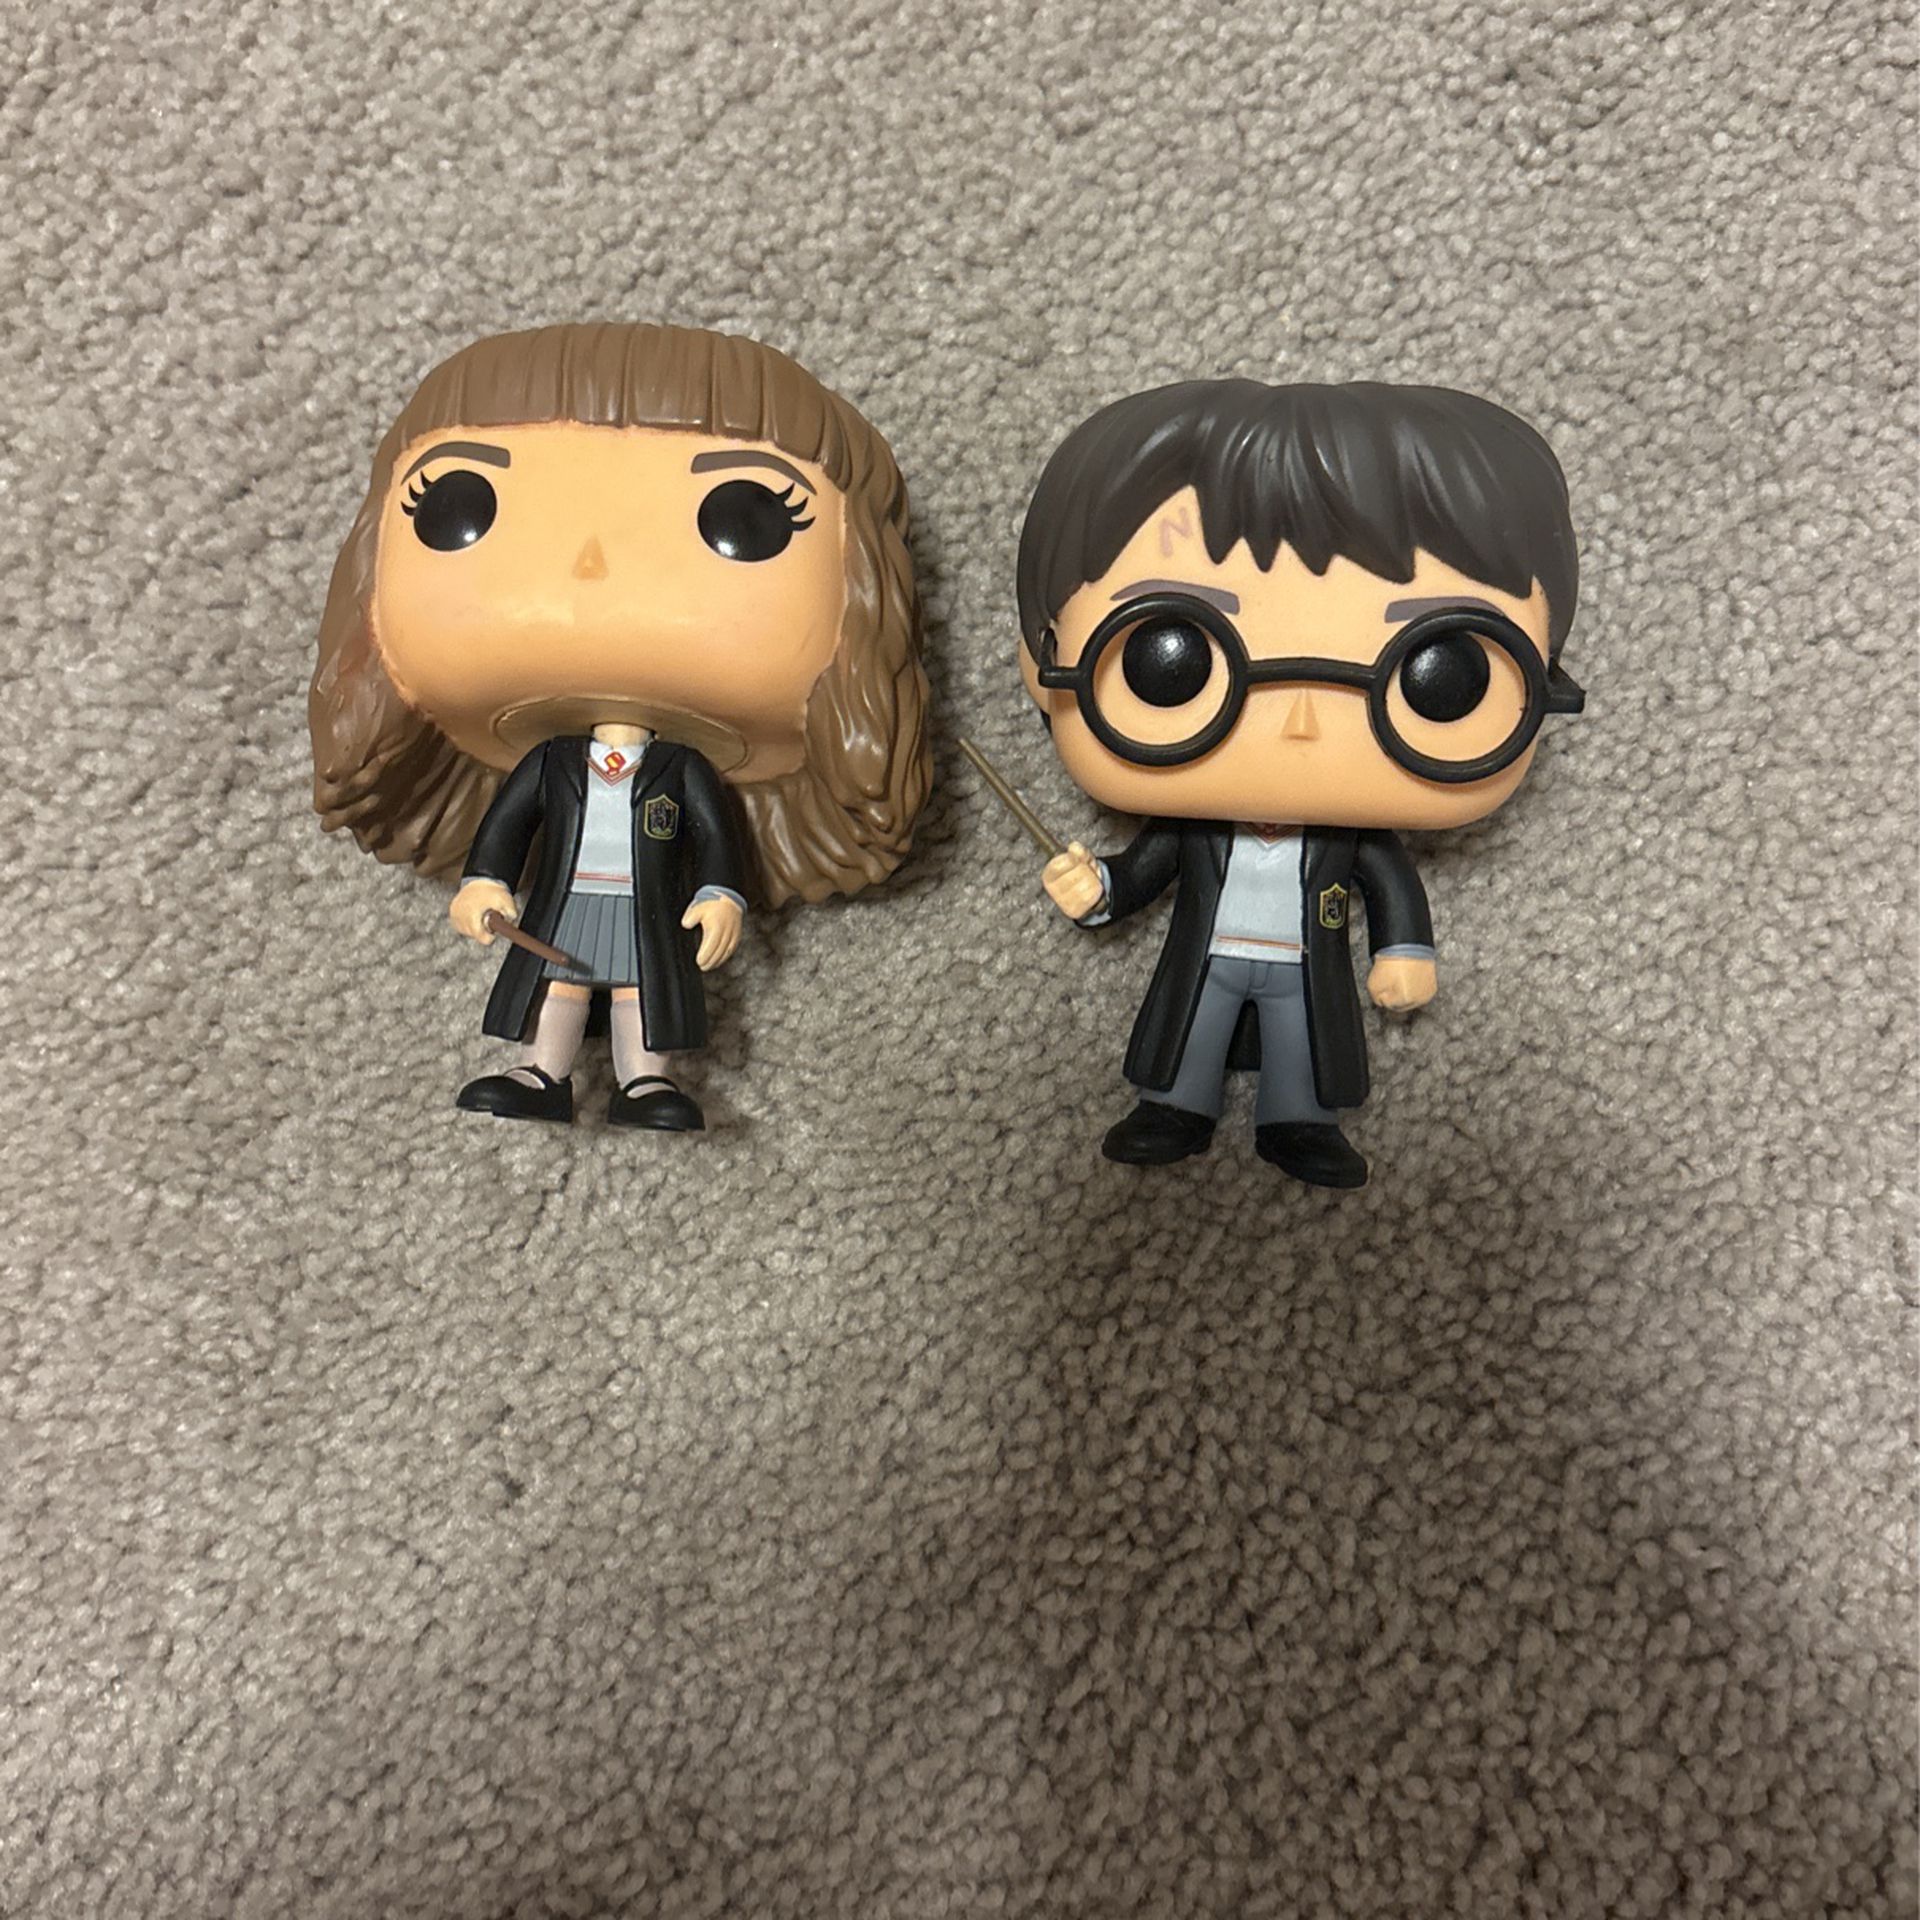 Harry Potter and Hermione Granger Funko Pops